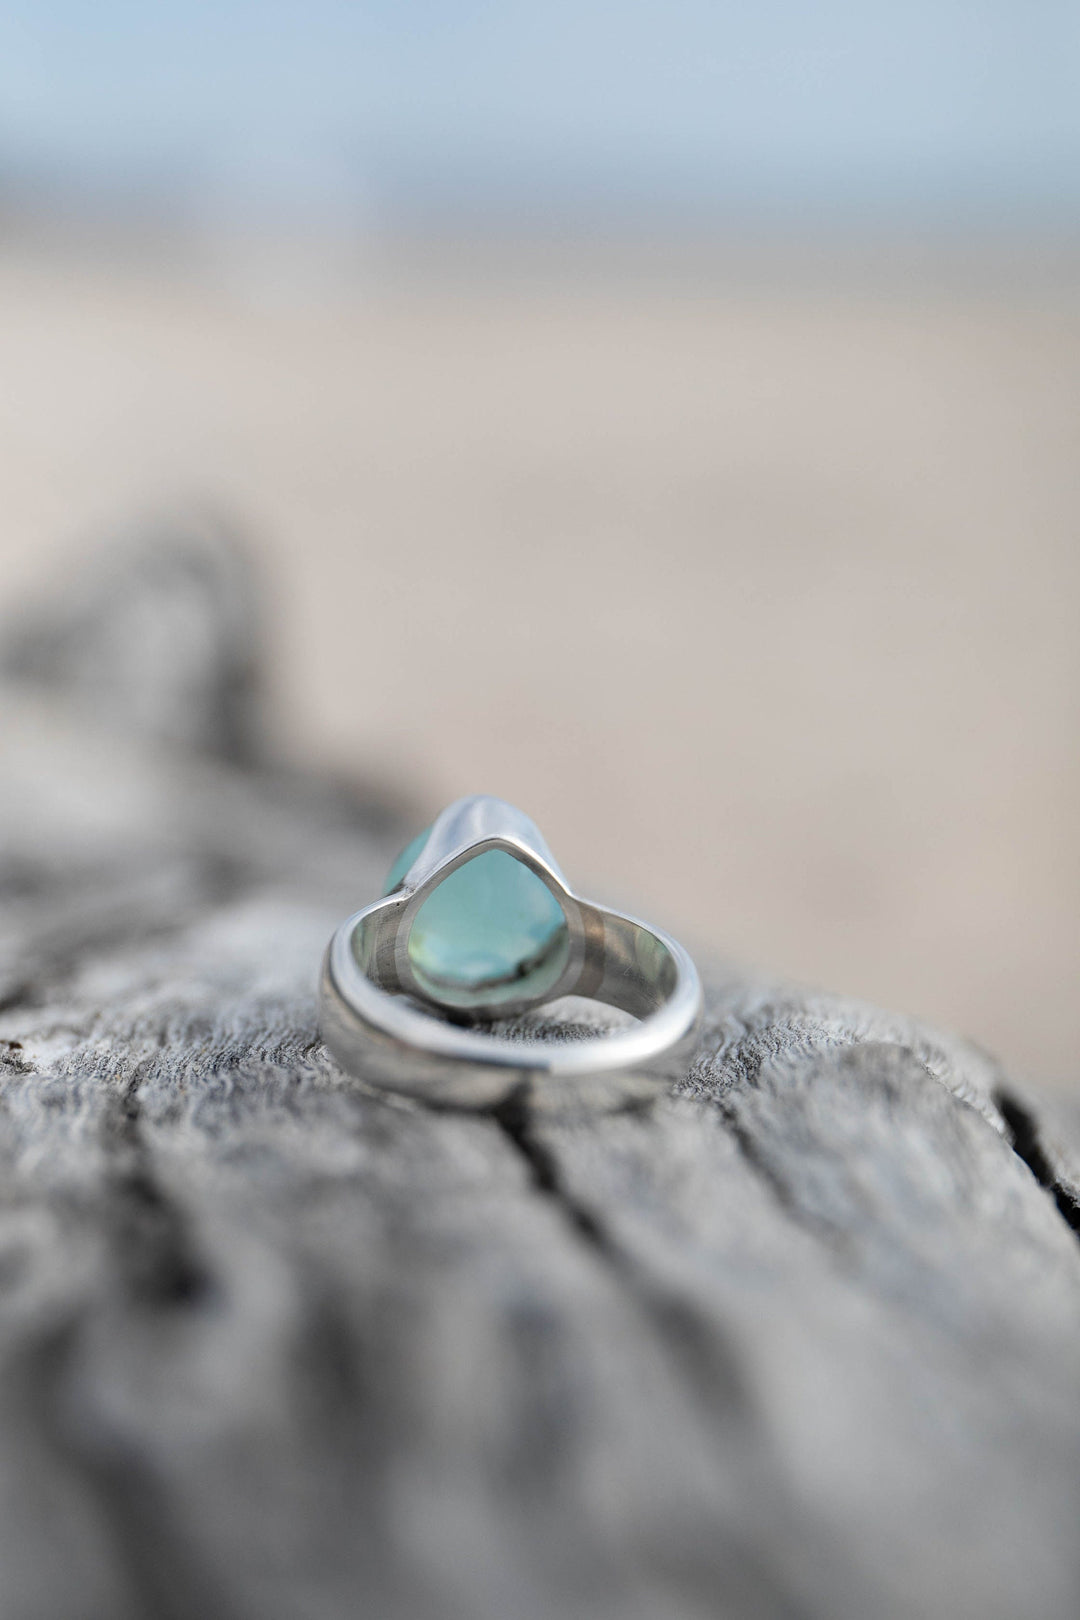 Soft Blue Peruvian Opal Ring set in Sterling Silver Setting - Size 7.5 US